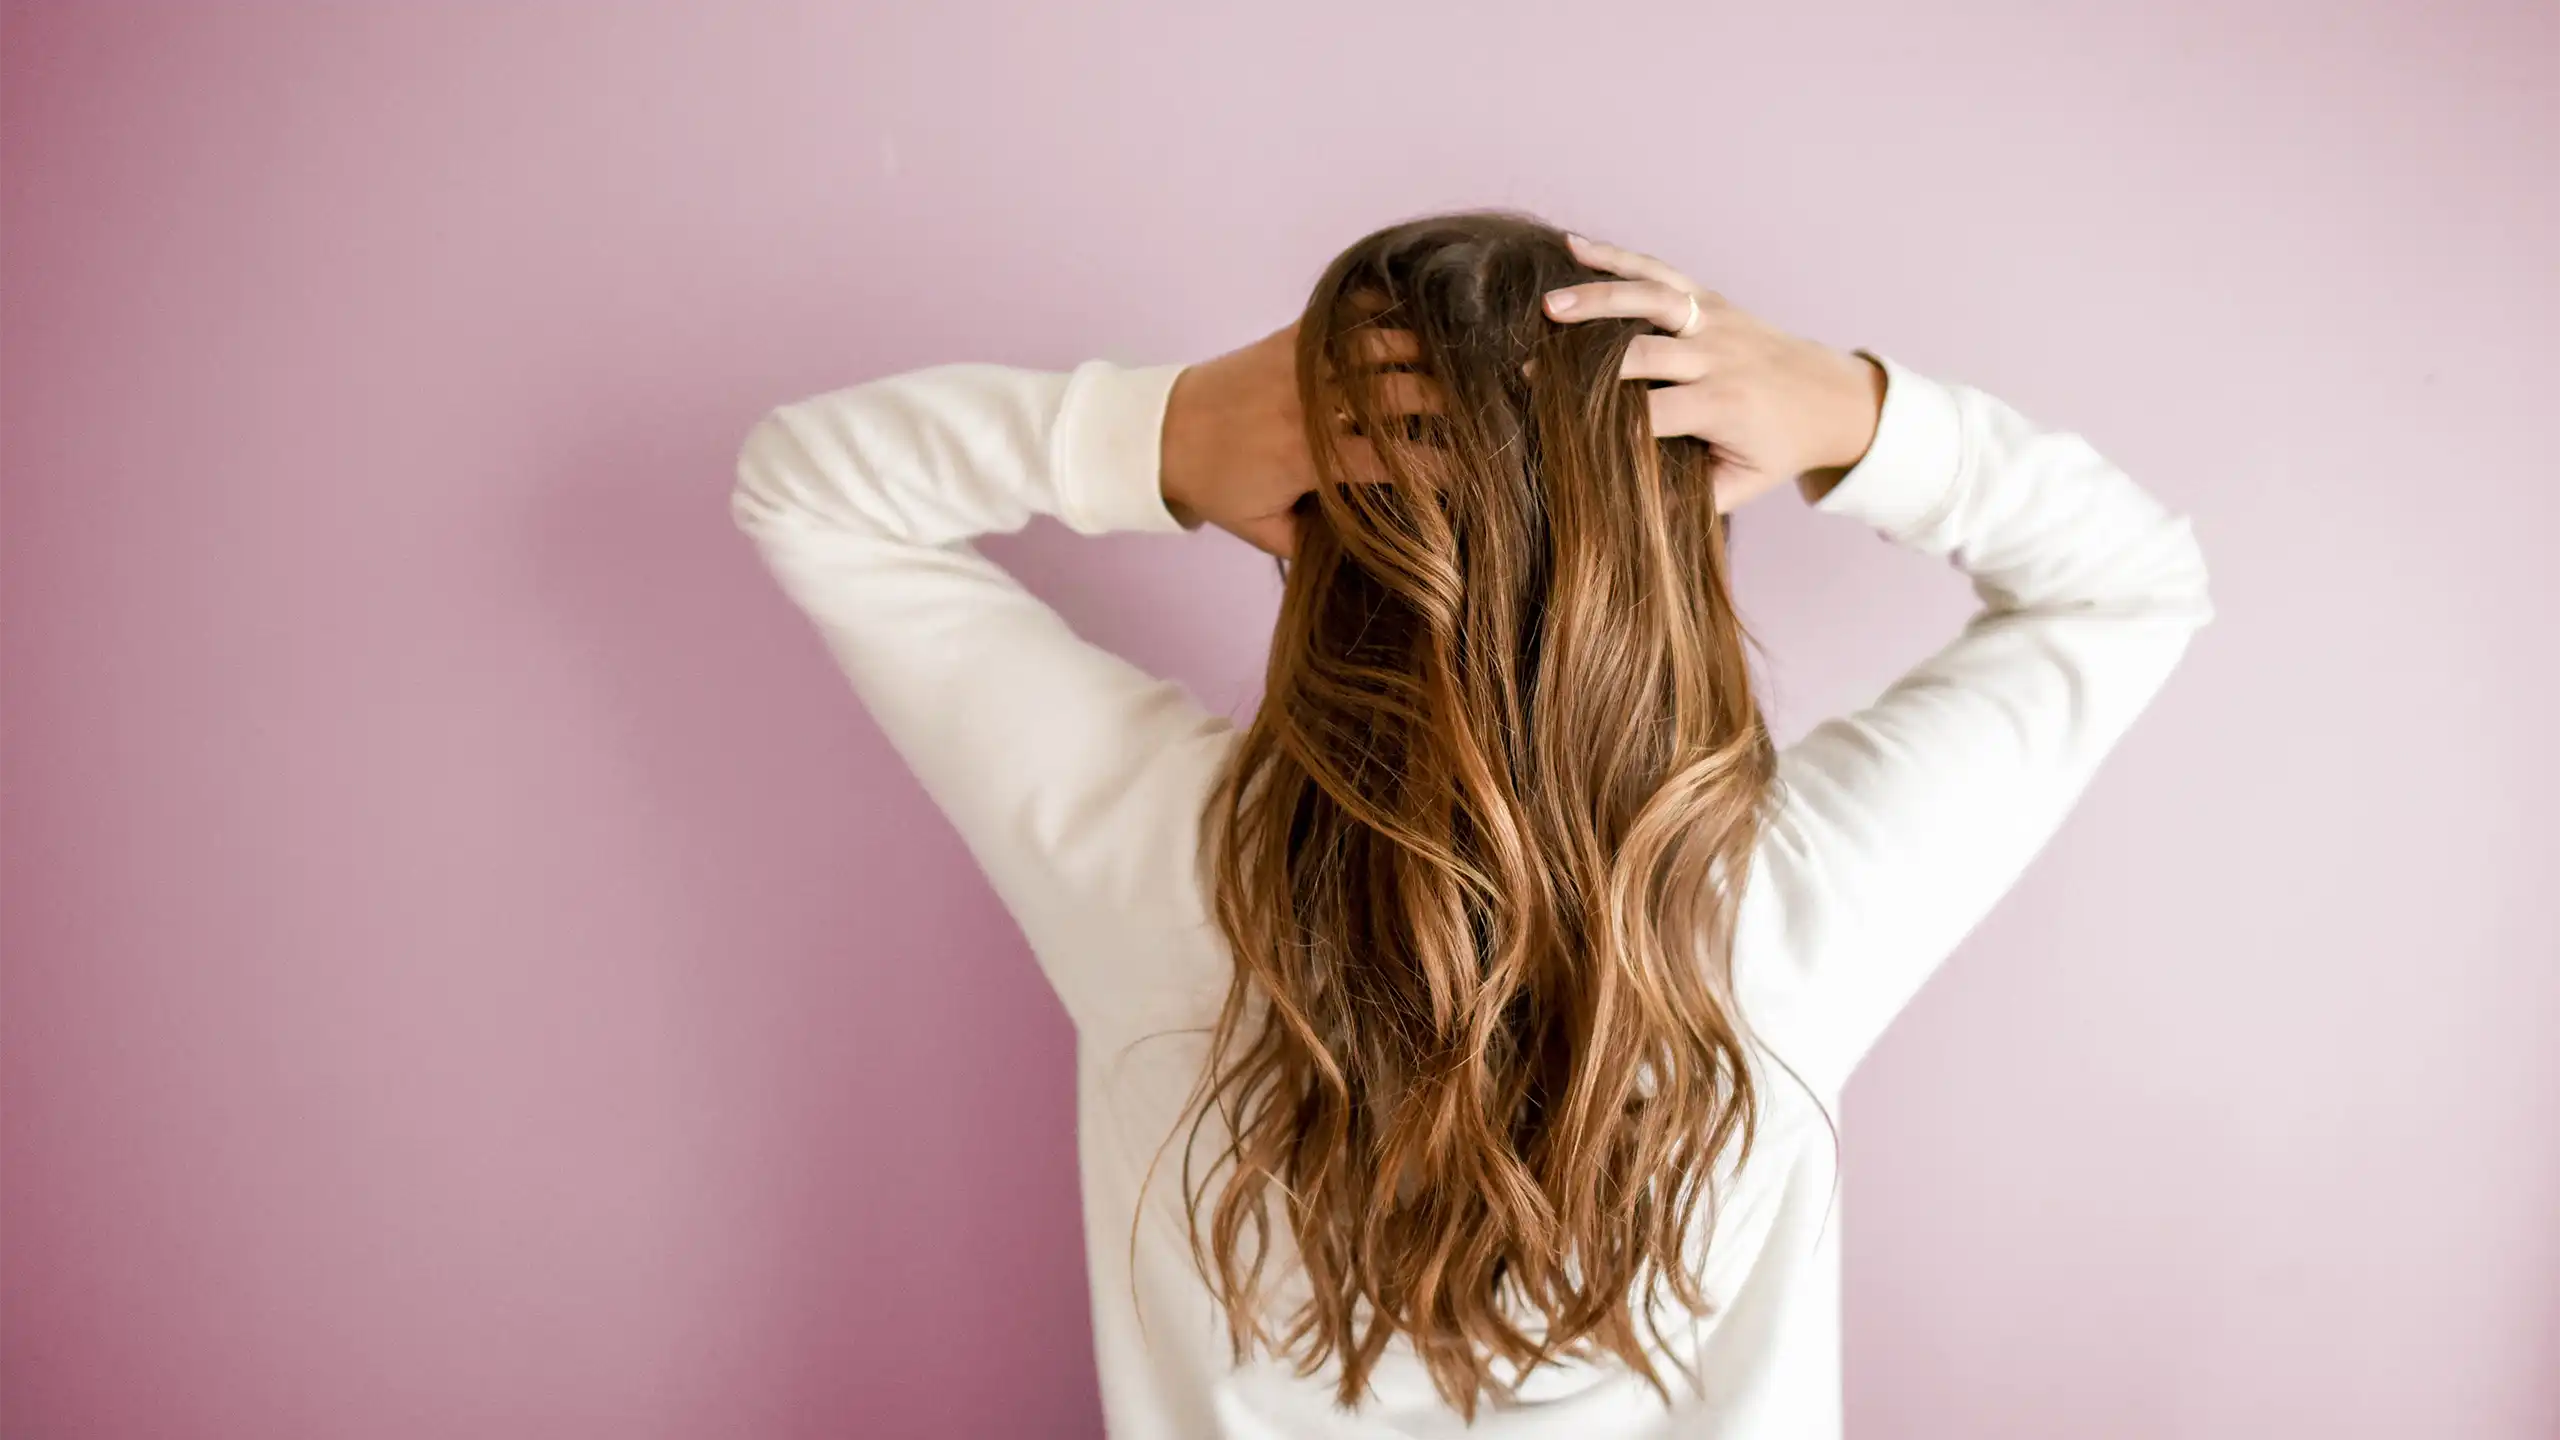 A woman holding the back of her head, long hair flowing down her back, against a pink wall.